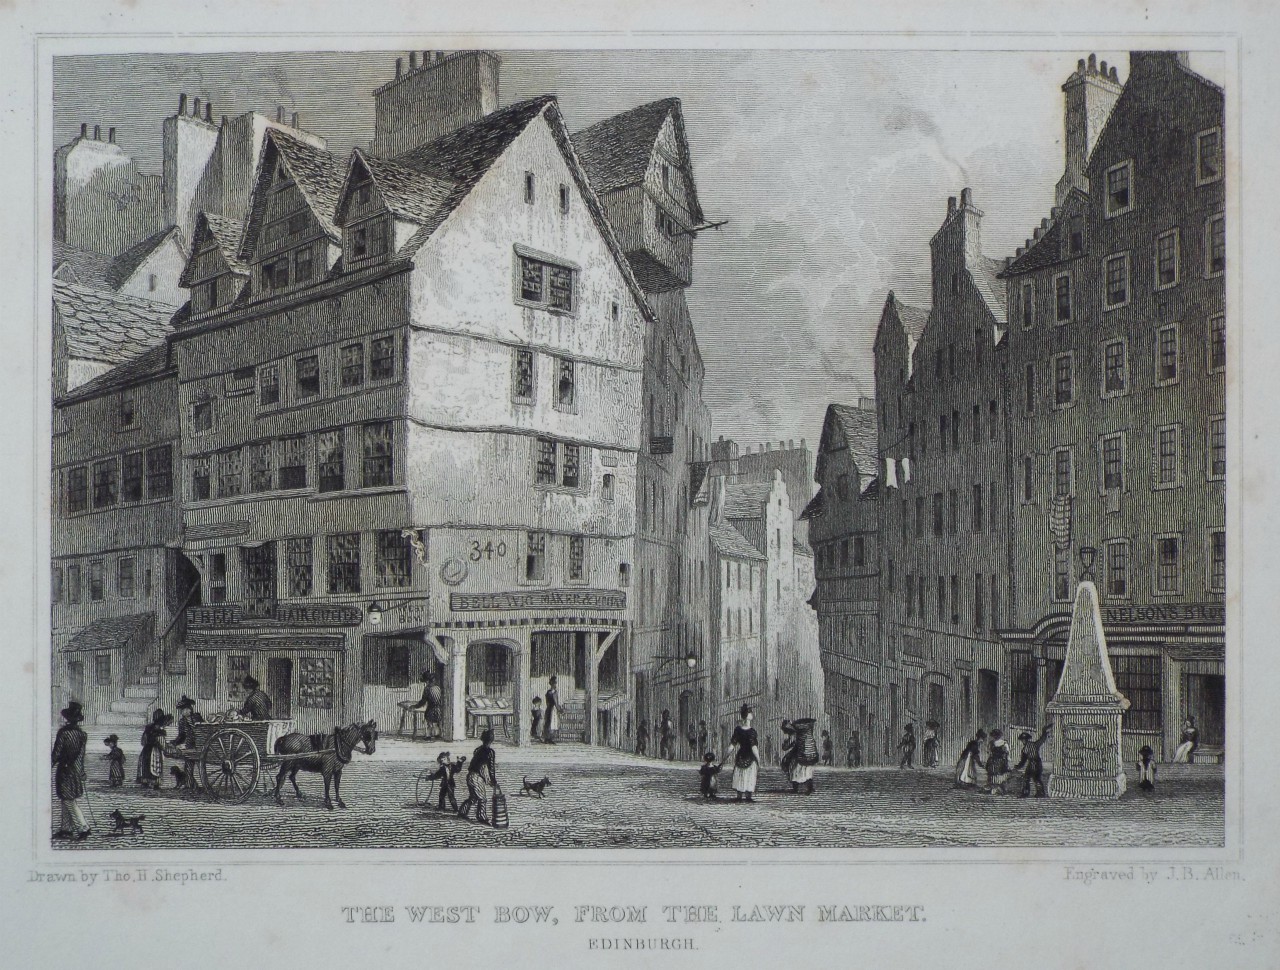 Print - The West Bow, from the Lawn Market. Edinburgh. - Allen